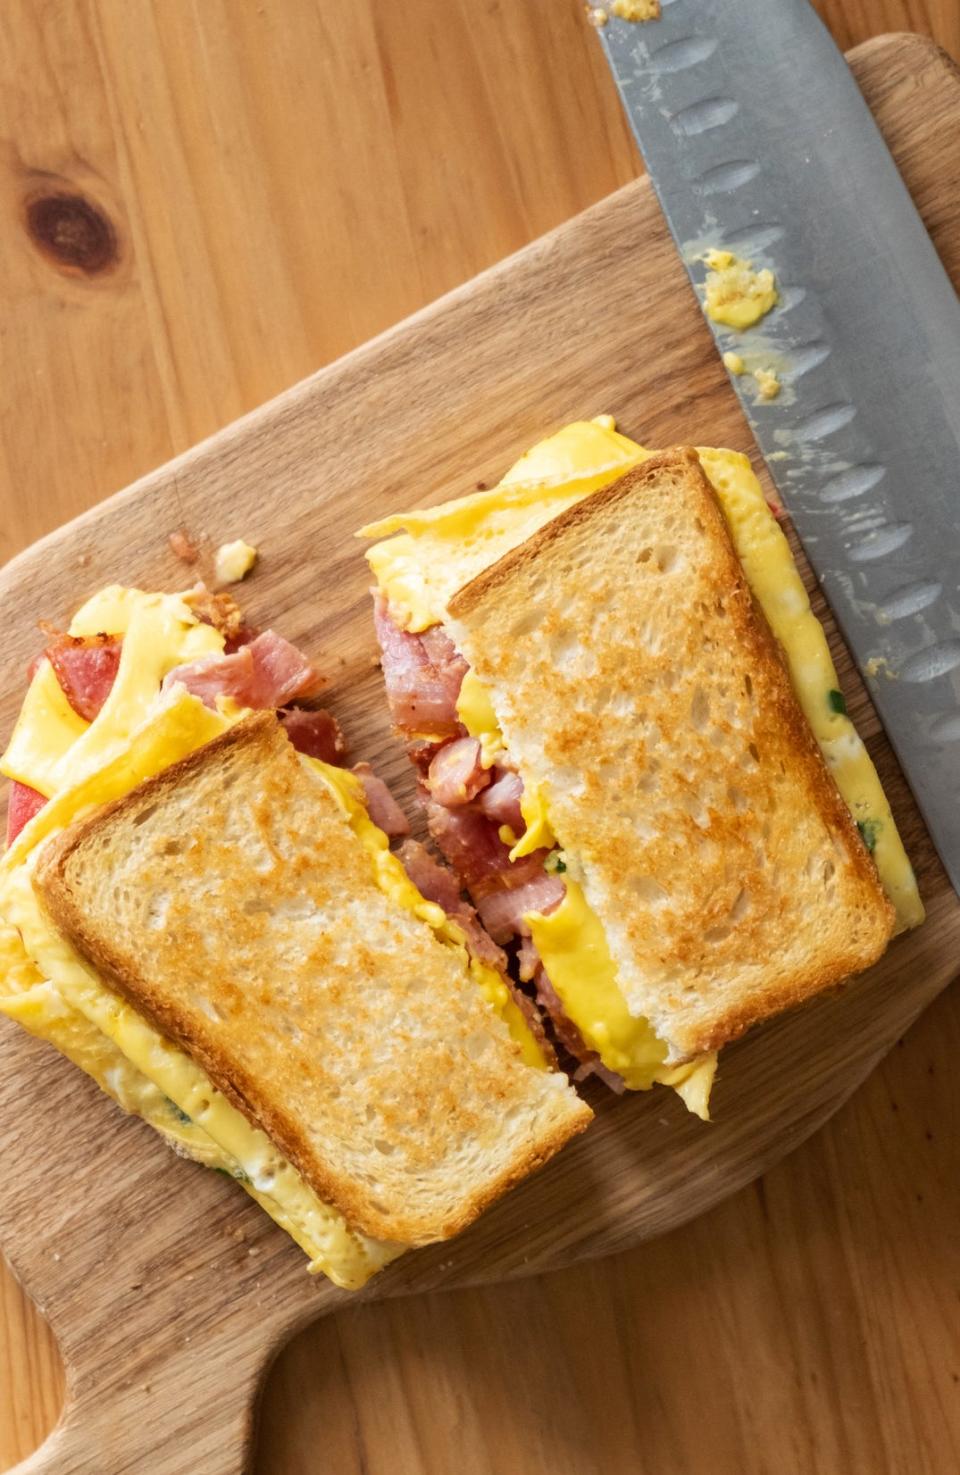 Breakfast sandwich with ham, eggs and cheese.